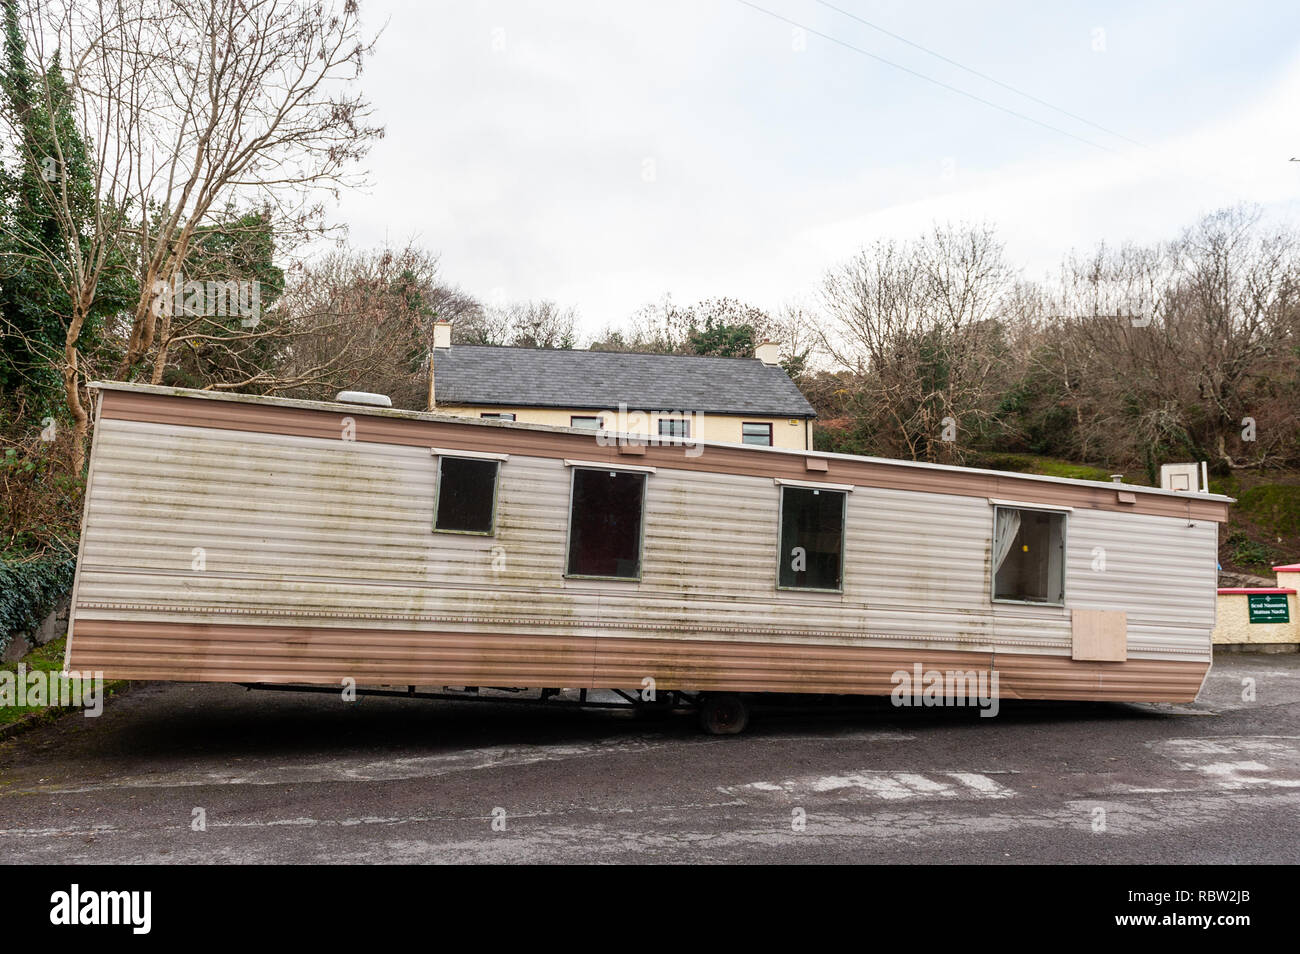 Ballydehob, West Cork, Ireland. 12th Jan, 2019. A dilapidated old mobile home appears to have been dumped outside St. Matthias National School in Ballydehob today. Locals say they saw it there early this morning with no idea who owns it. It is not yet established who will dispose of it. Credit: Andy Gibson/Alamy Live News. Stock Photo